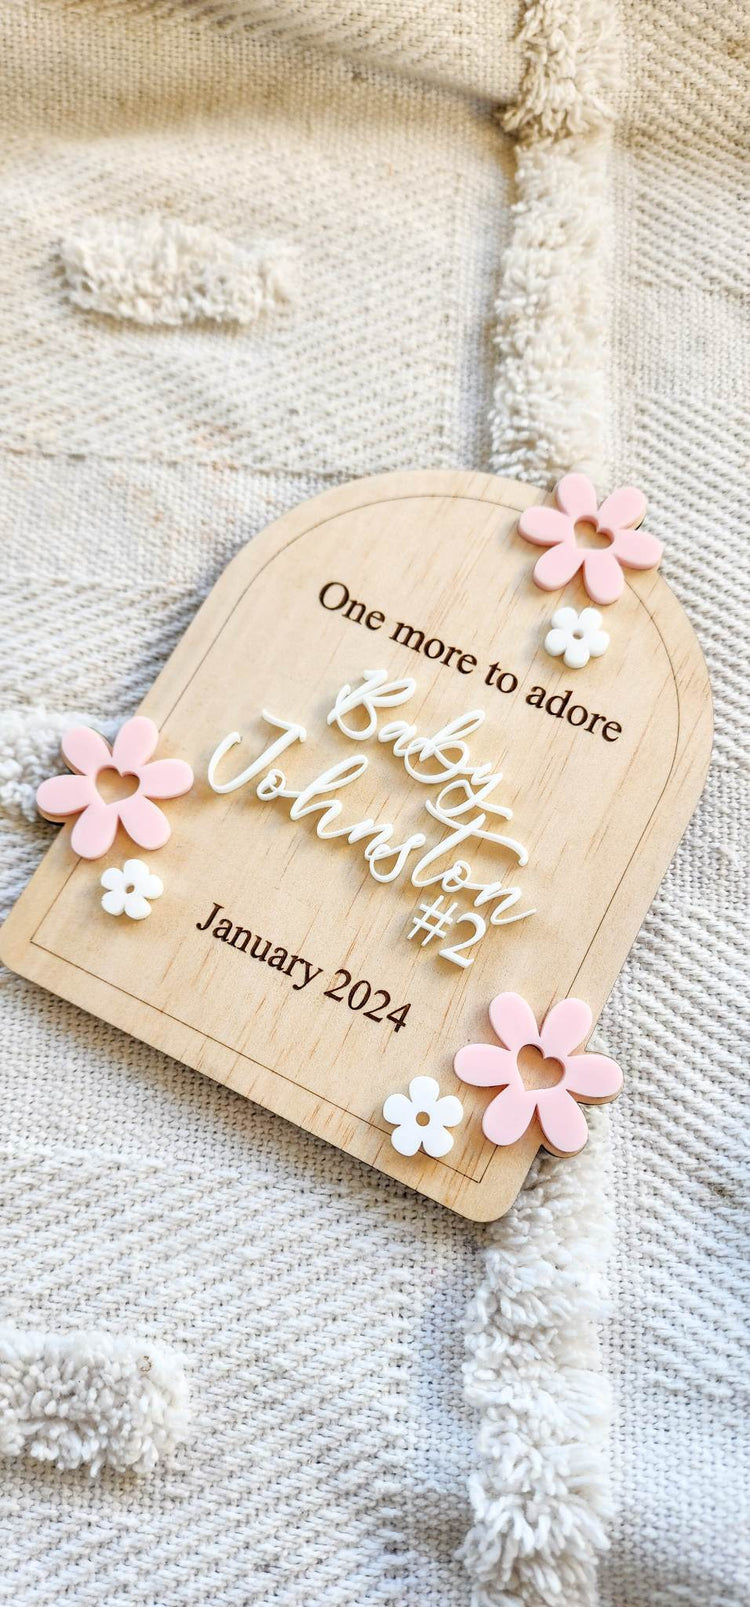 One more to adore - Daisy Announcement Plaque